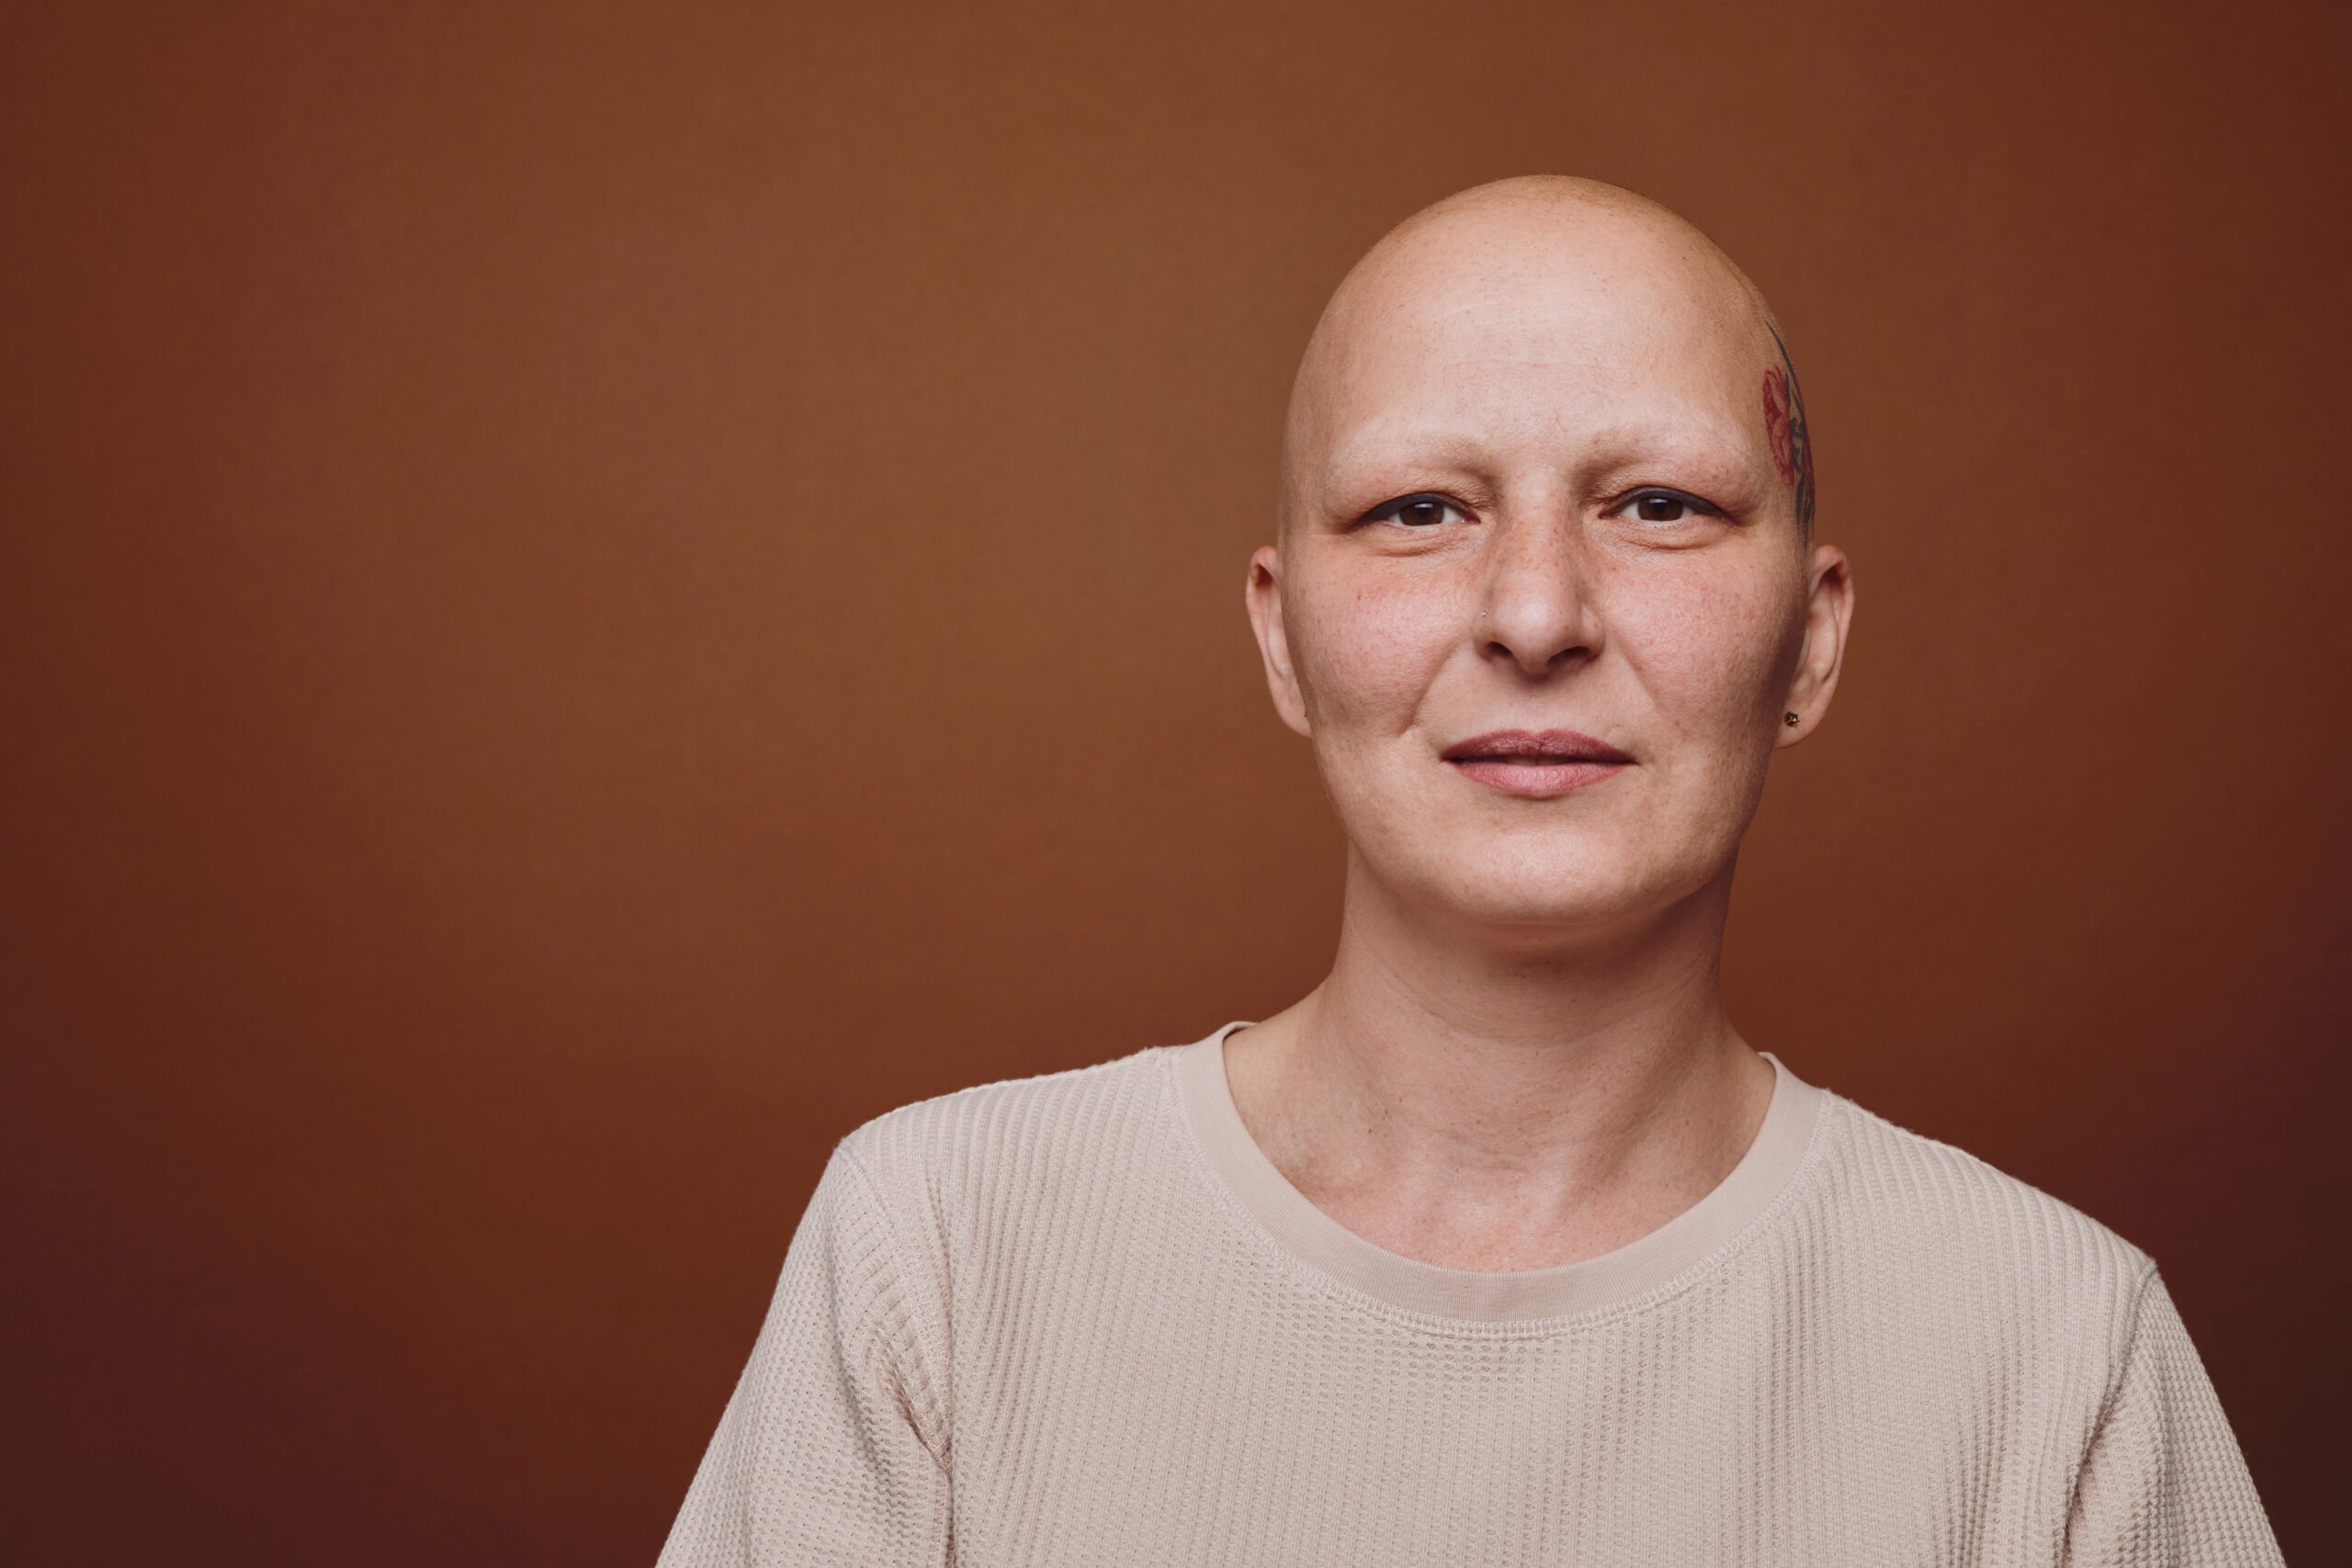 What is alopecia?